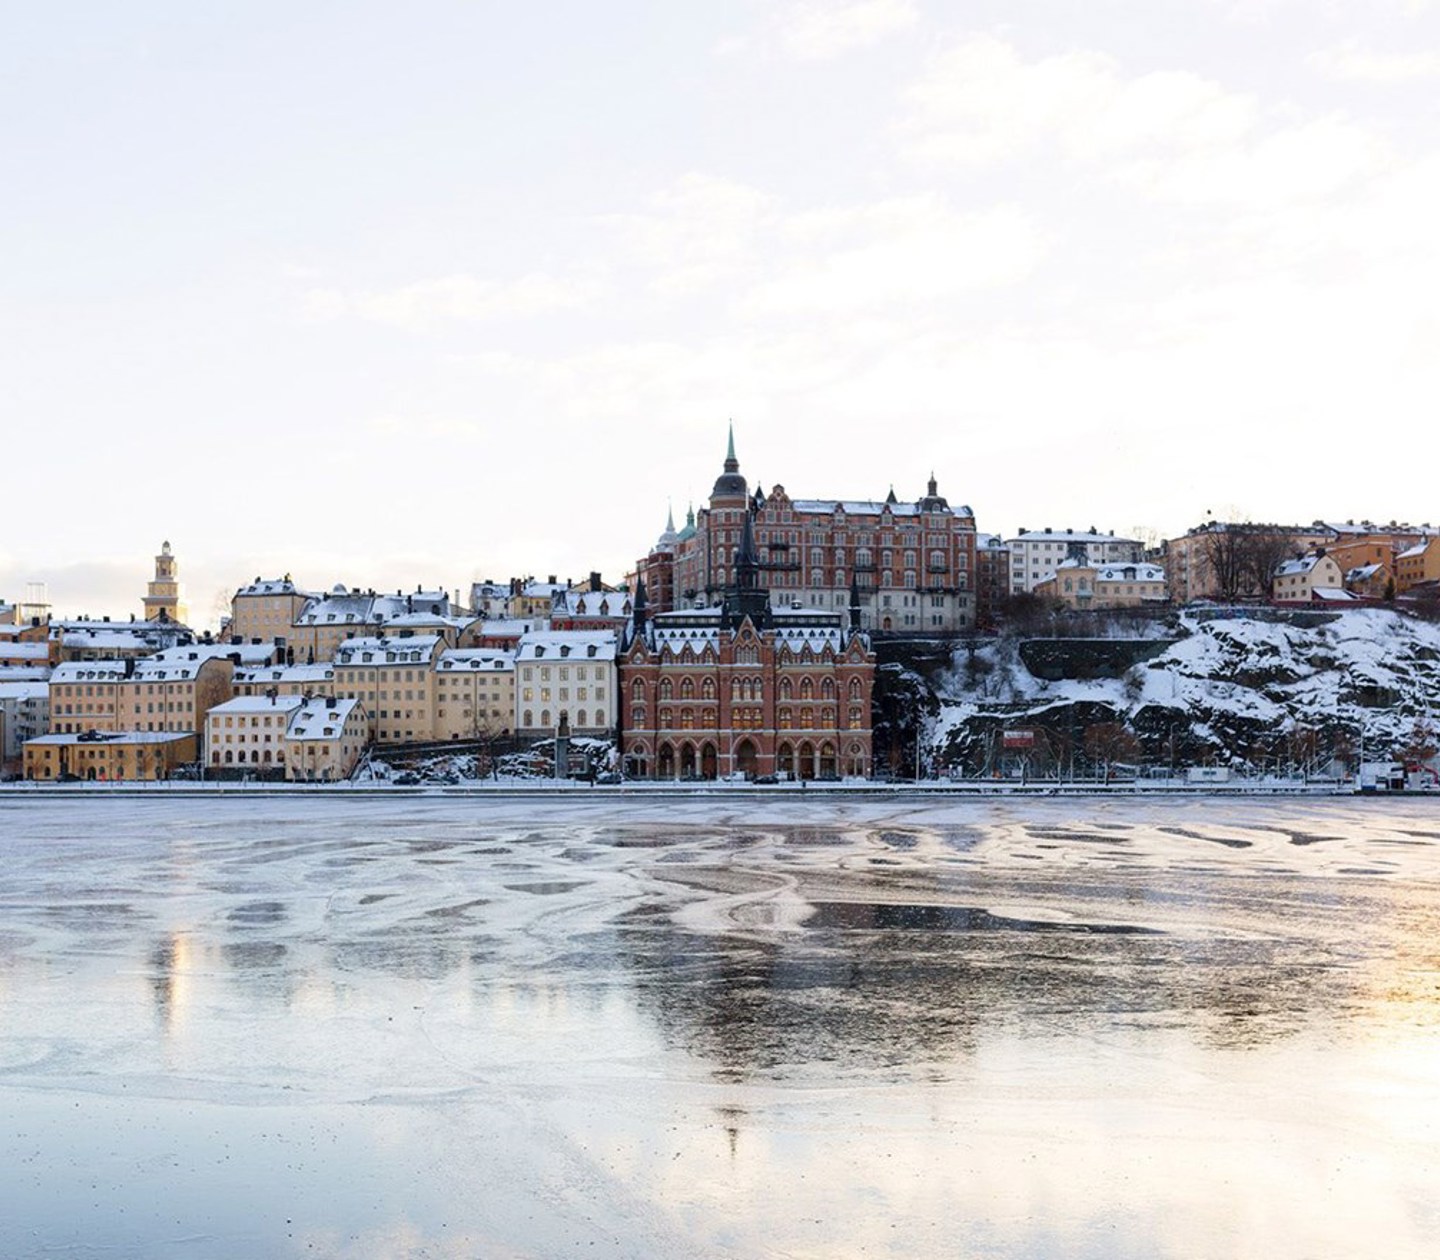 Stockholm during winter time